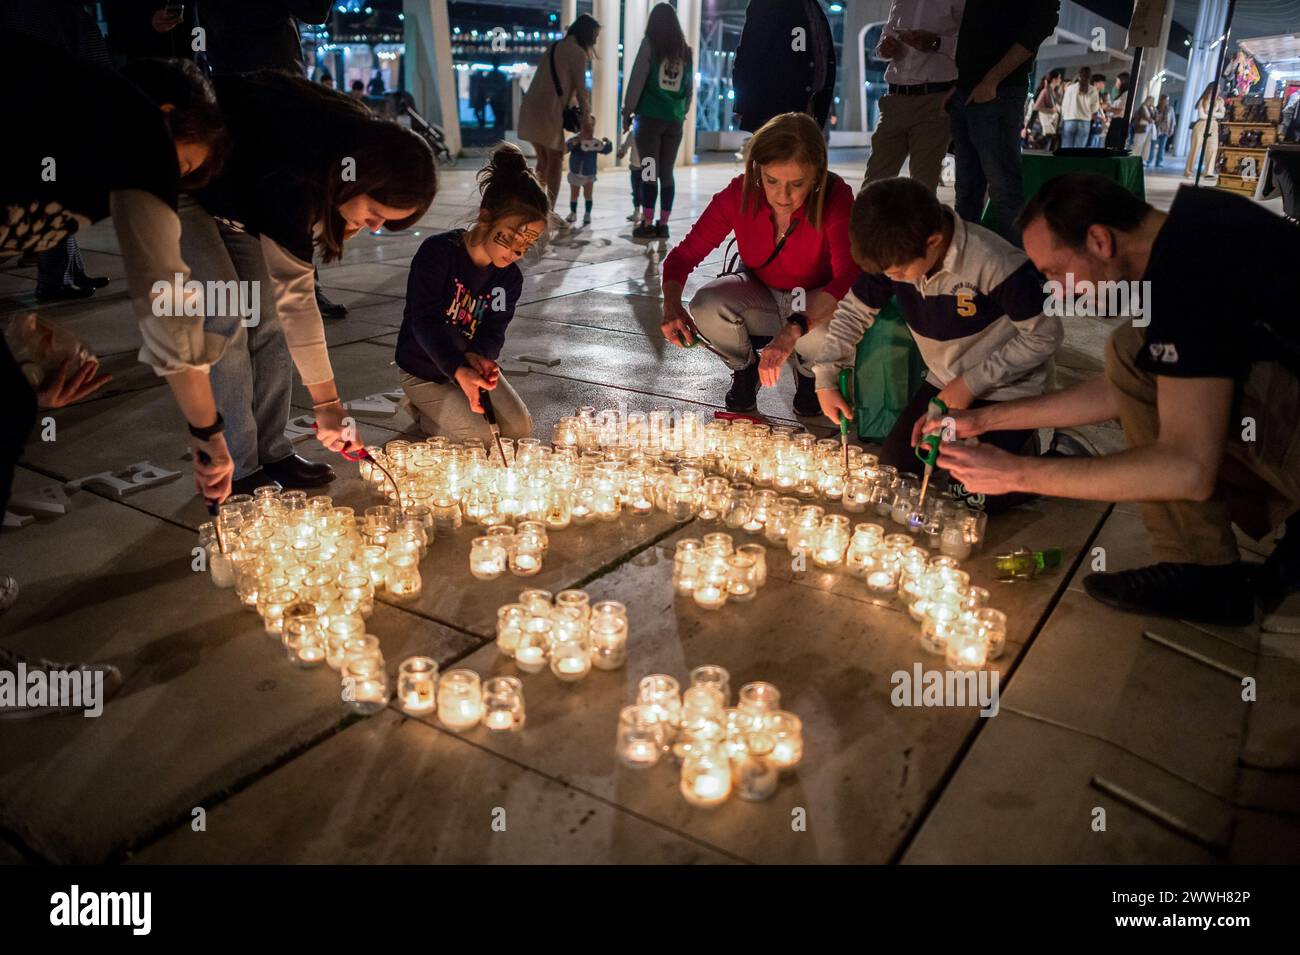 Members of the World Wildlife Foundation (WWF) are seen lighting candles of a mosaic that depicts a panda, the symbol of WWF, during the Earth Hour in the centre of Malaga. The figure made with candles is a panda, the symbol of the WWF. Thousands of cities around the world switched off their electric lights during the Earth Hour to highlight the dangers of climate change. The figure made with candles is a panda, the symbol of the WWF. Thousands of cities worldwide switched off their electric lights during Earth Hour to highlight the dangers of climate change. Stock Photo